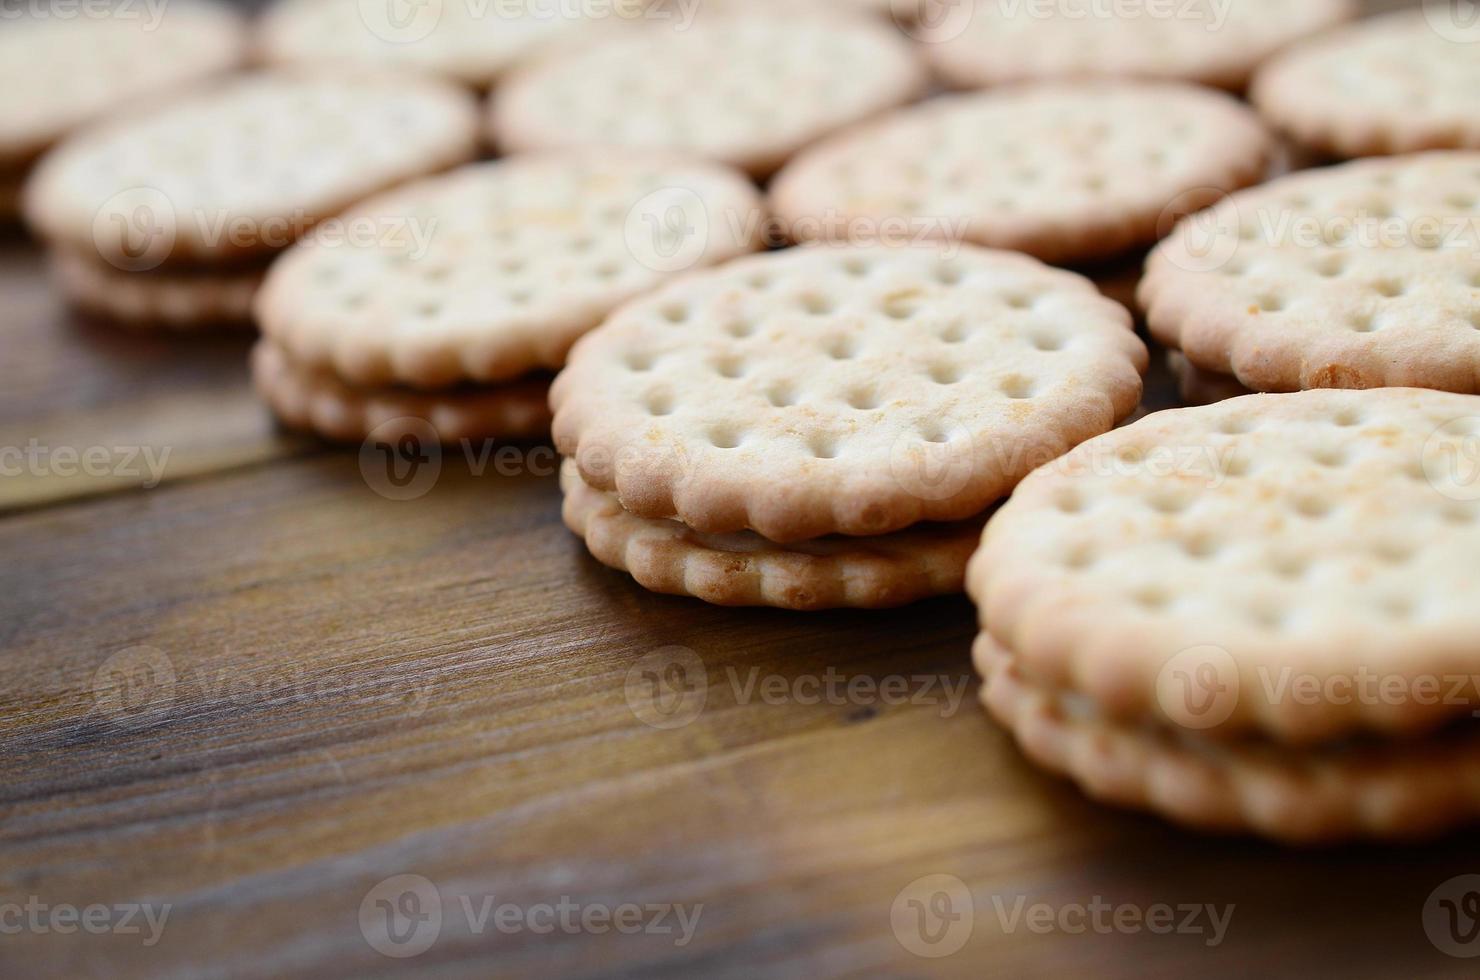 A round sandwich cookie with coconut filling lies in large quantities on a brown wooden surface. Photo of edible treats on a wooden background with copy space